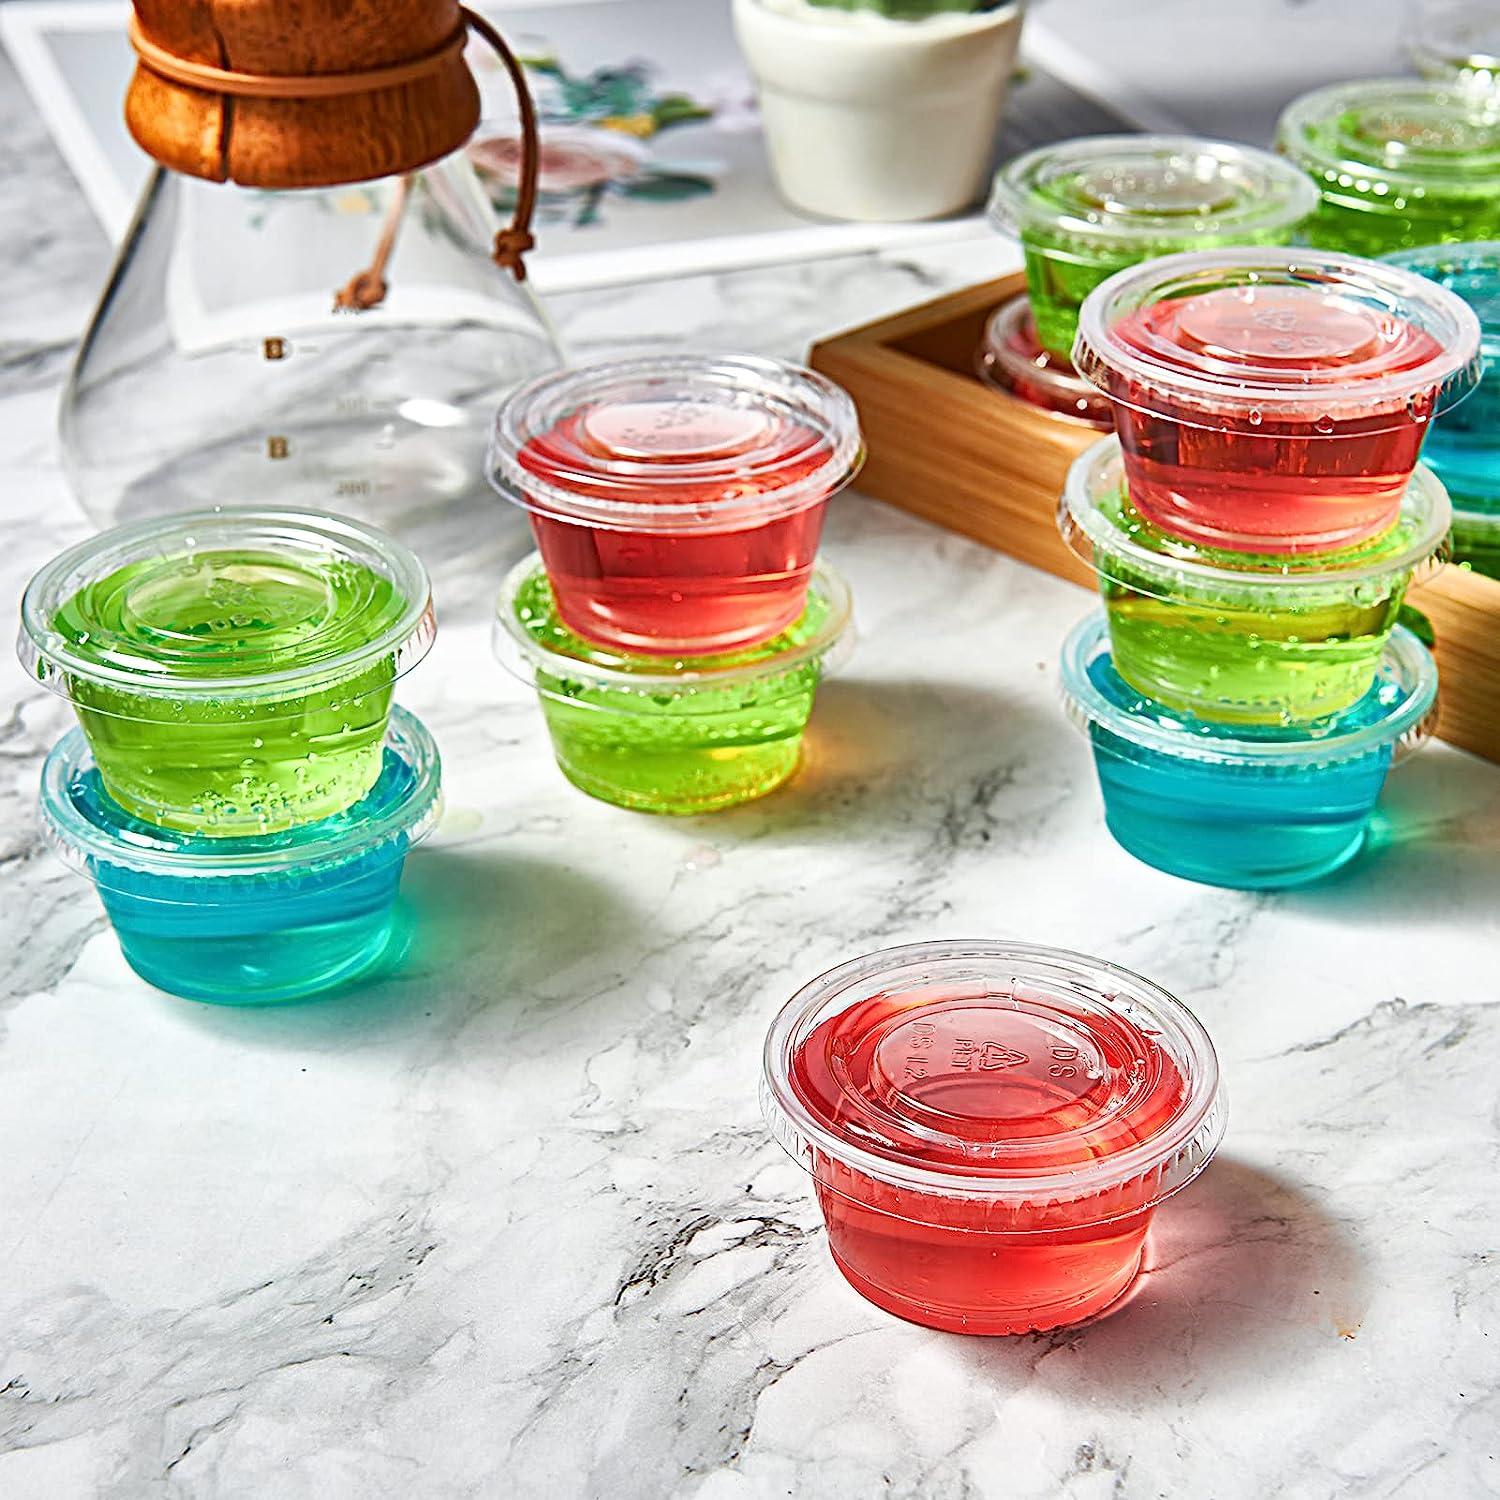 130 Sets - 2 Oz ] Jello Shot Cups, Small Plastic Containers with